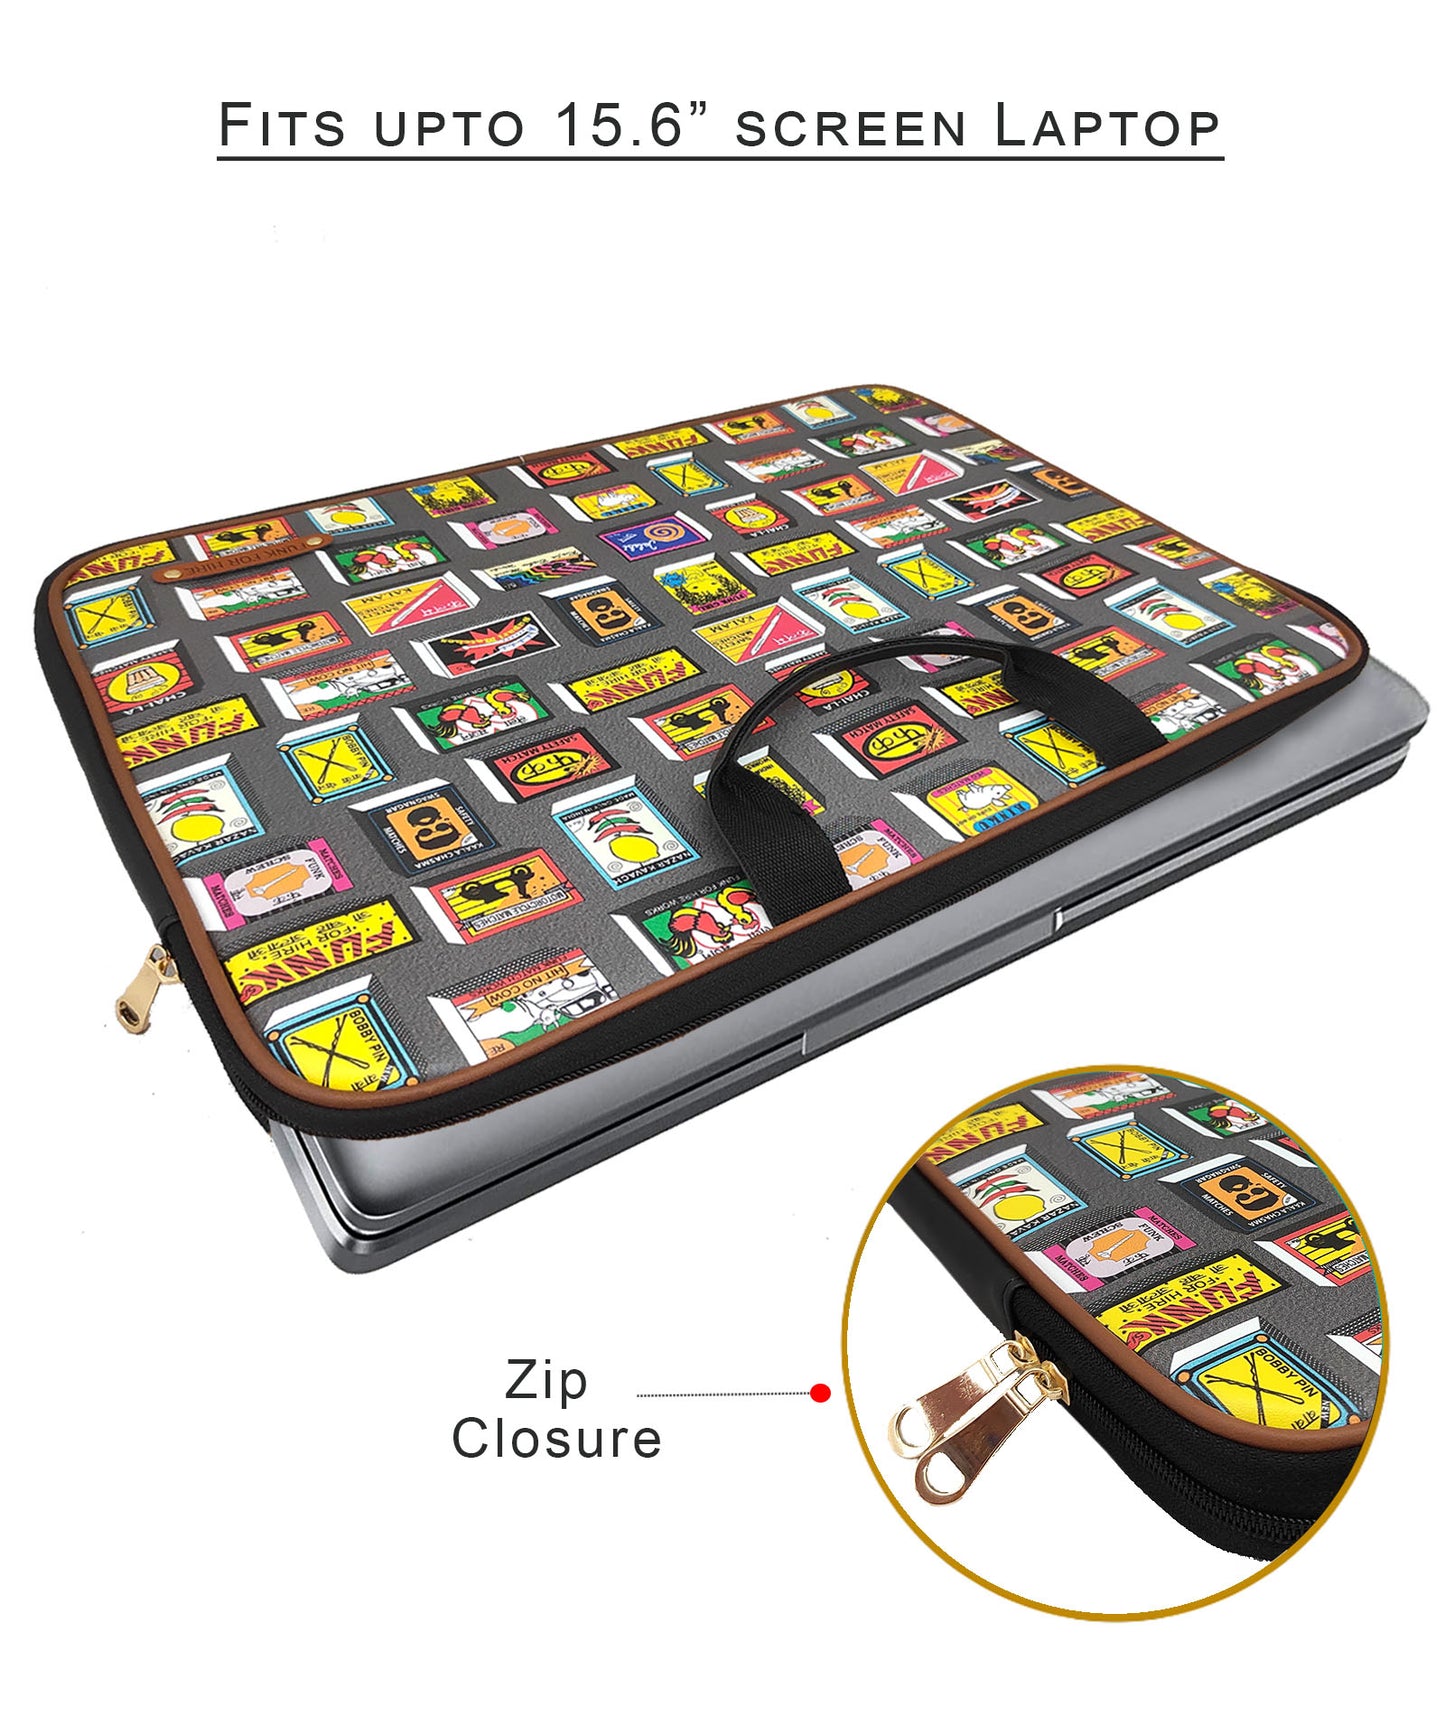 Combo Offers : Match Collage Laptop Grey Sleeve & Matchstick Card Black Wallet